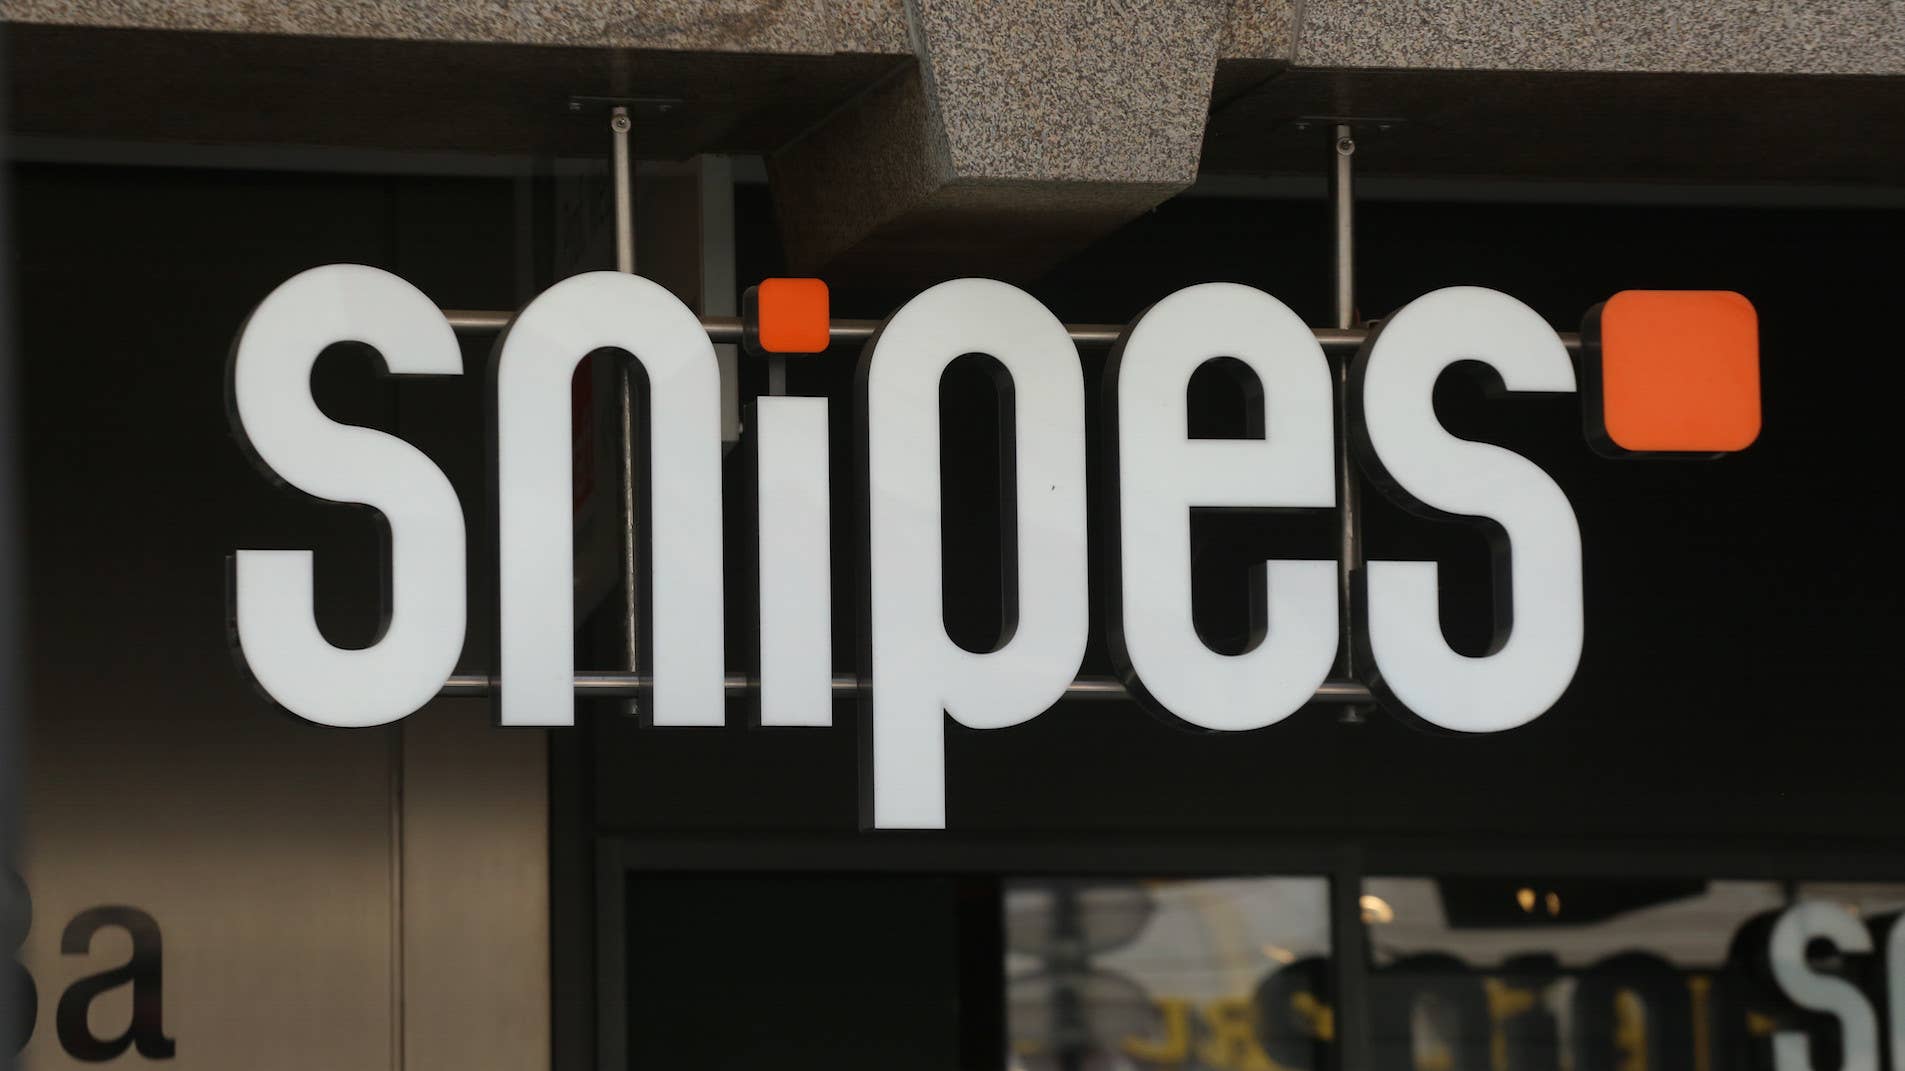 The logo of the German footwear shop Snipes